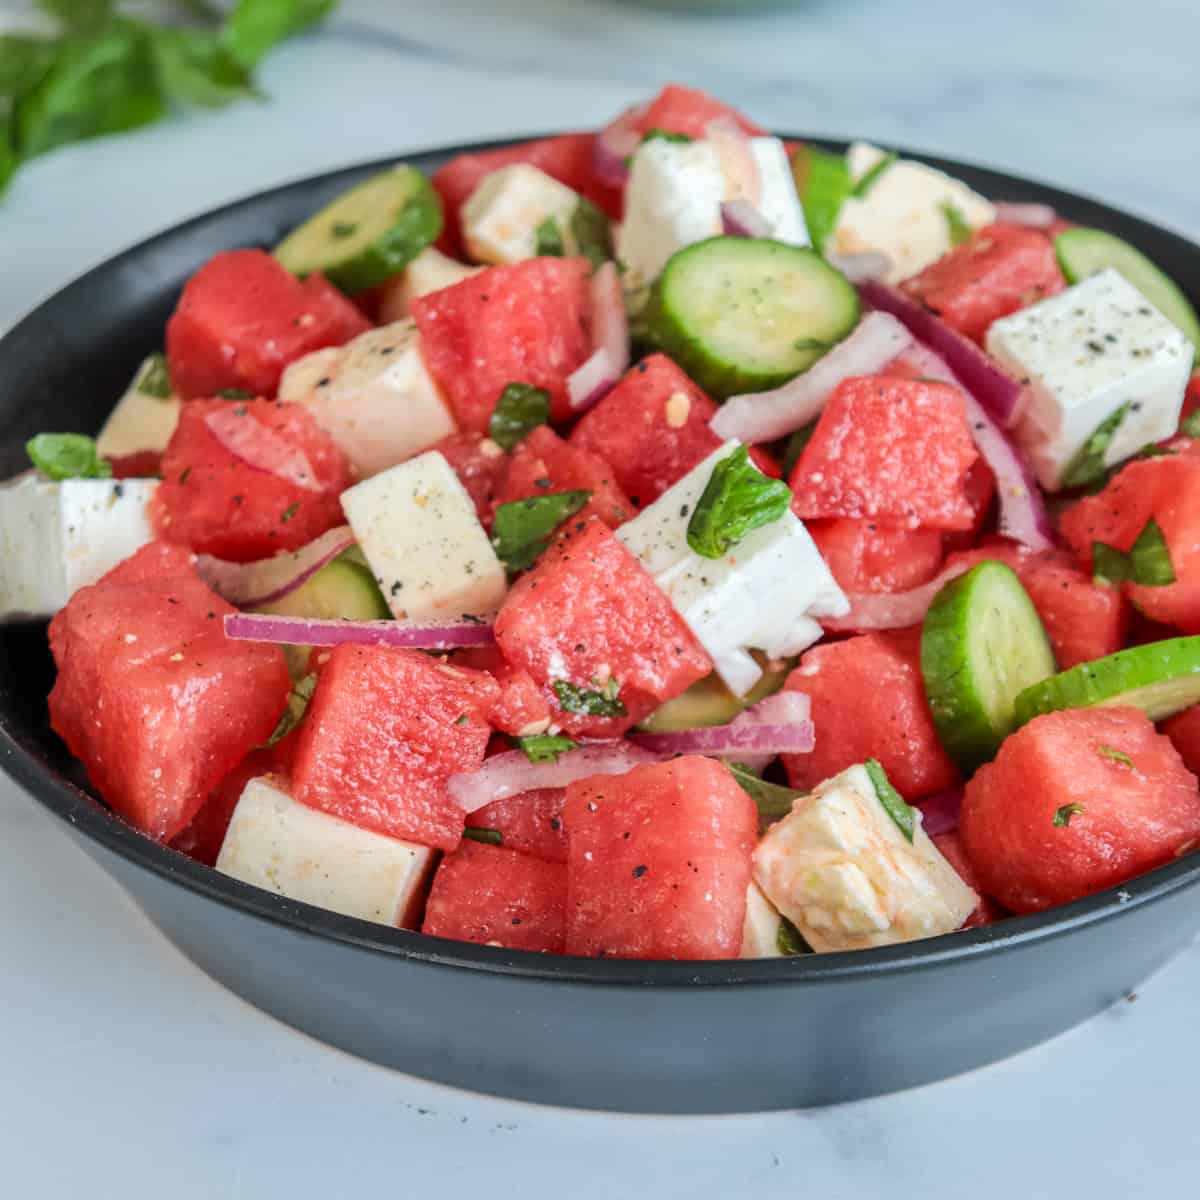 Watermelon salad with feta cheese.